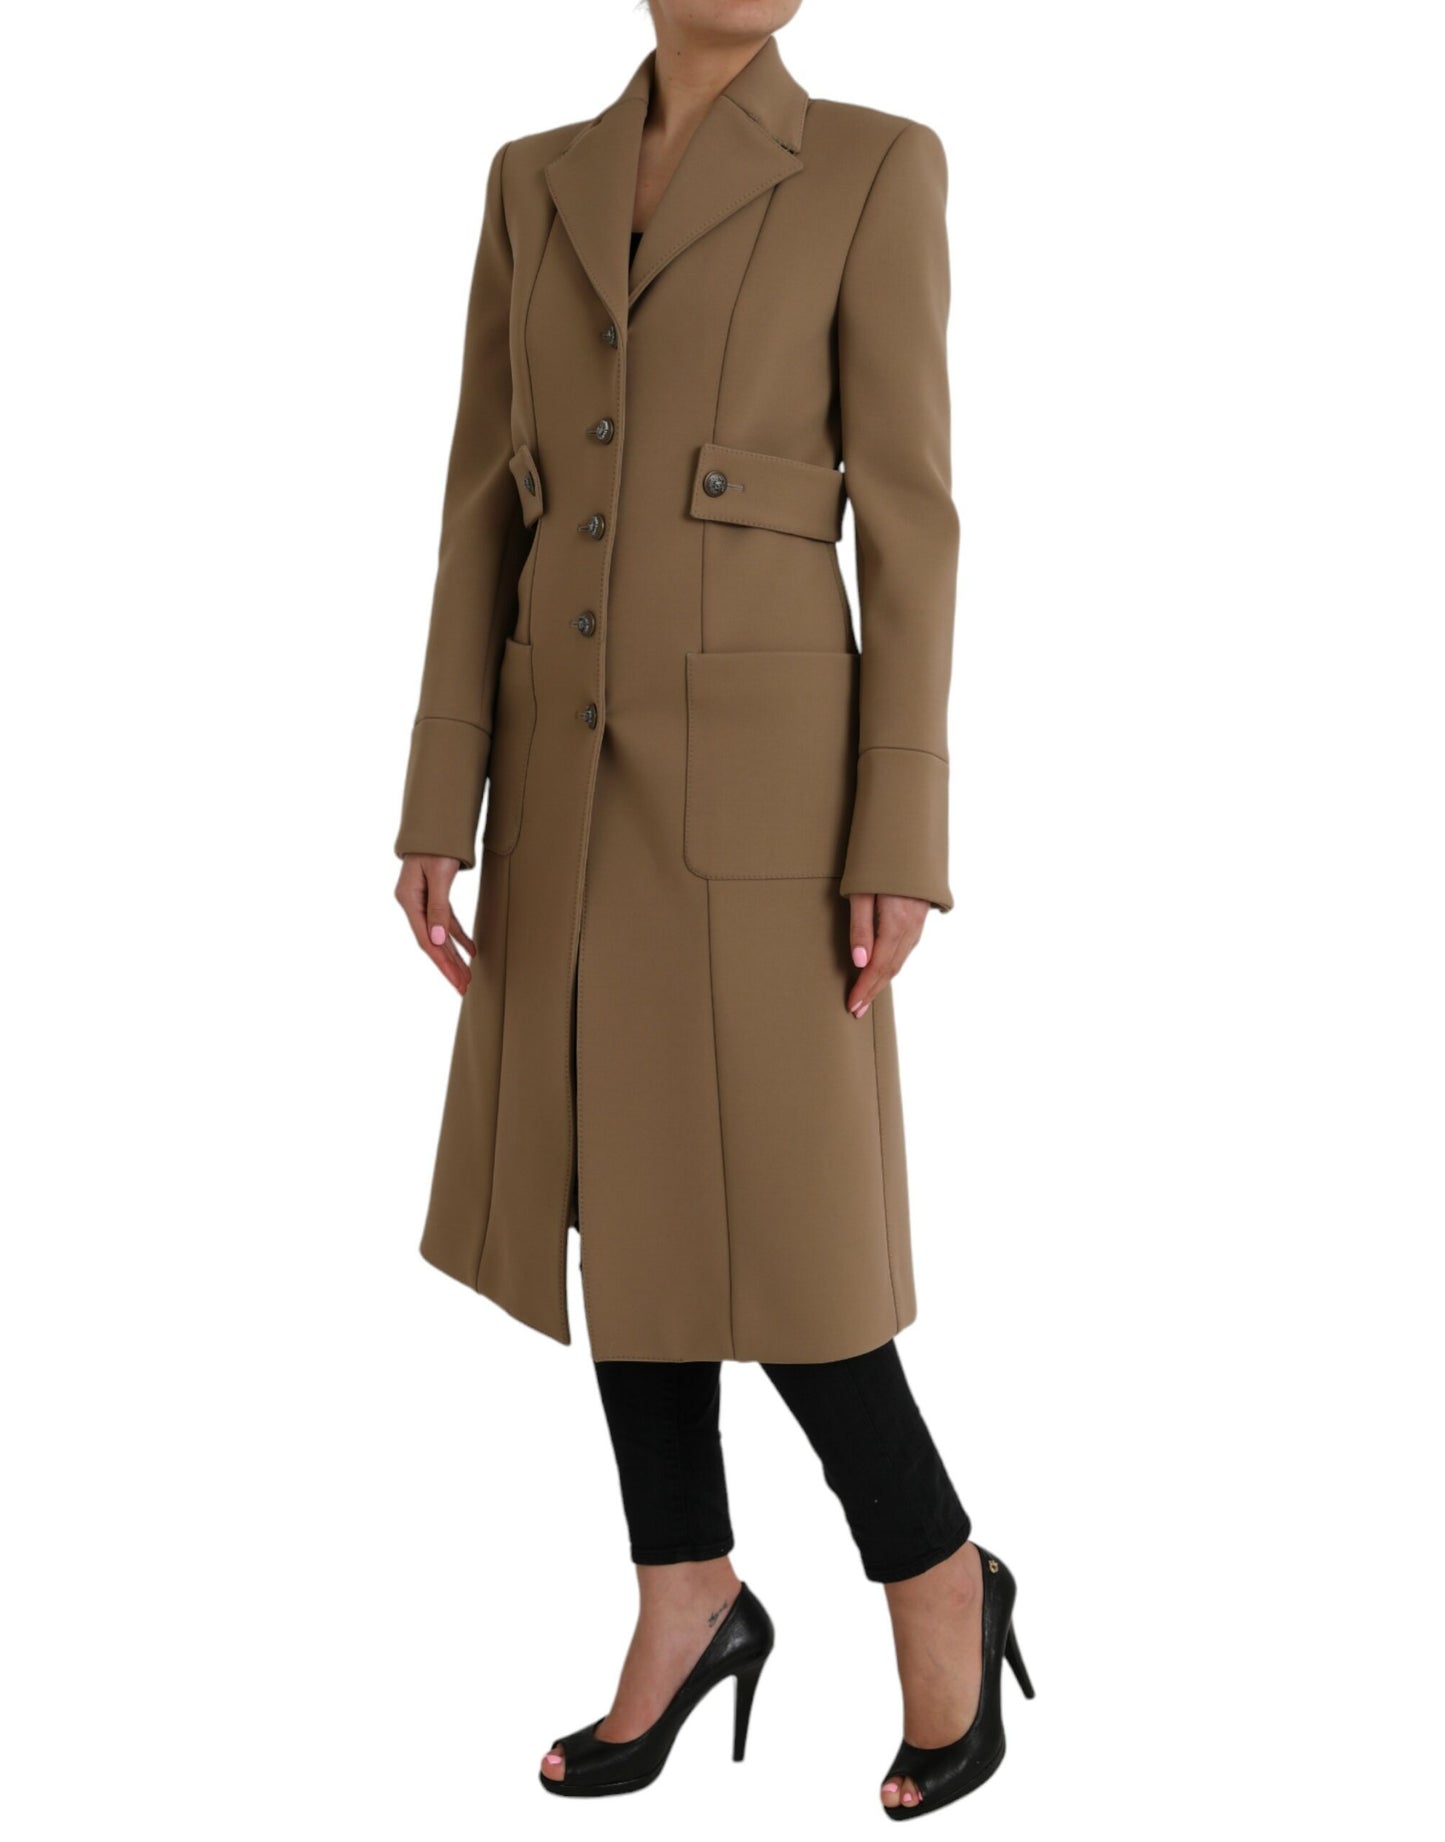 Dolce & Gabbana Brown Button Down Long Trench Coat Jacket